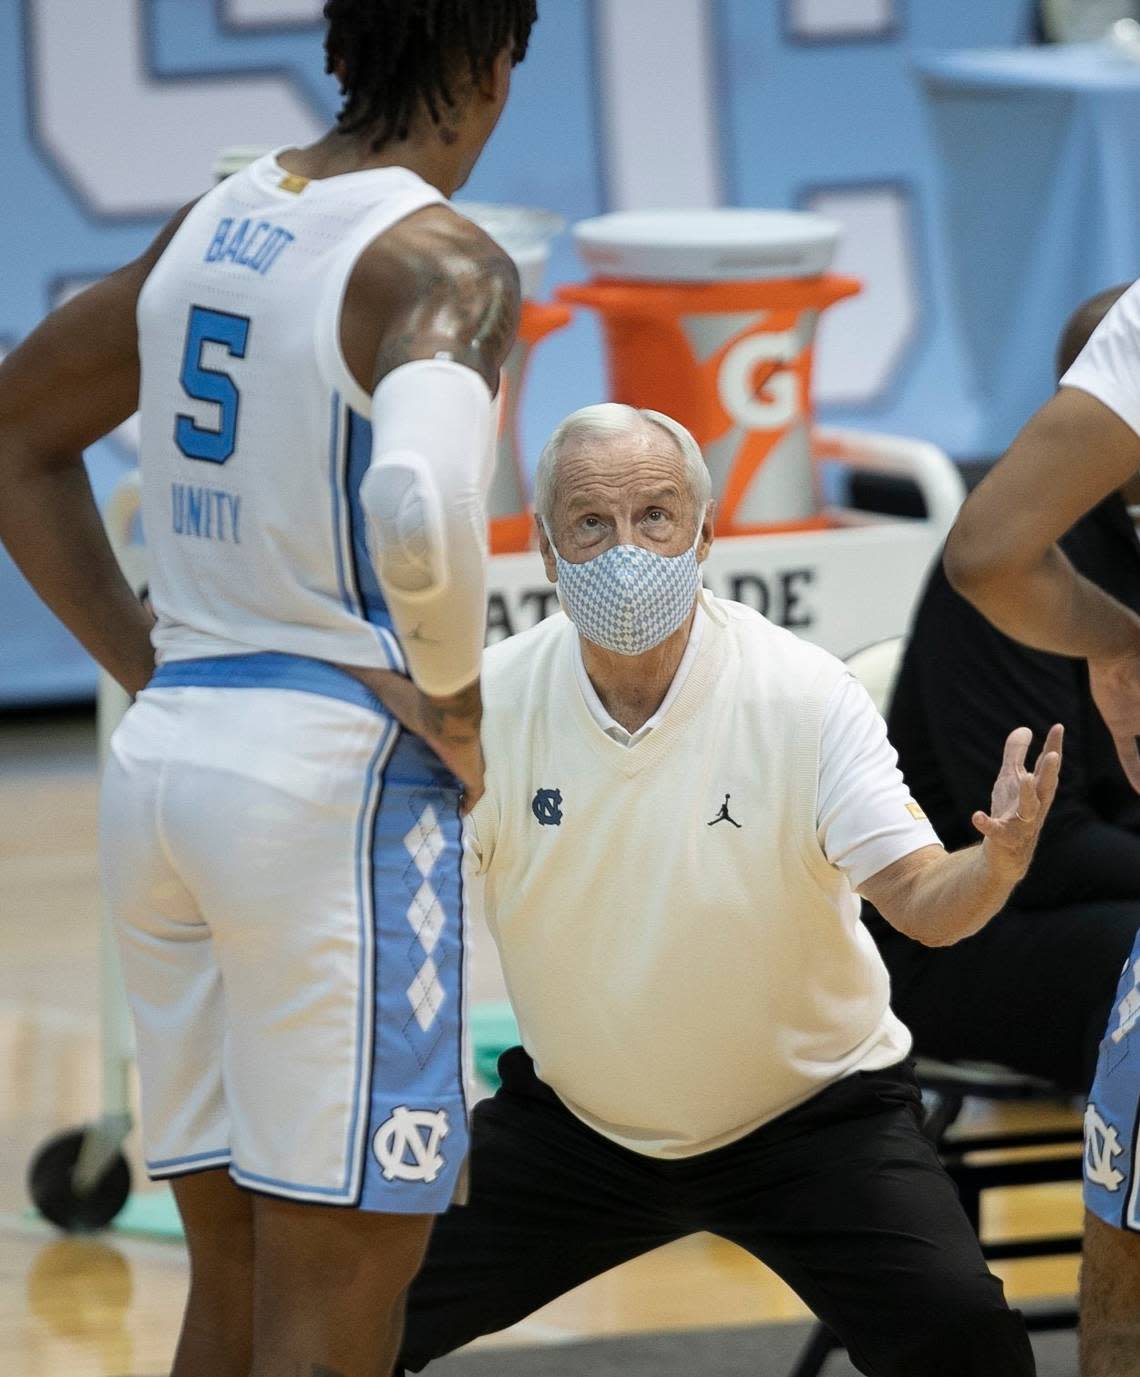 North Carolina coach Roy Williams has a word with Armando Bacot (5) during a time out in the second half against NCCU on Saturday, December 12, 2020 at the Smith Center in Chapel Hill, N.C.